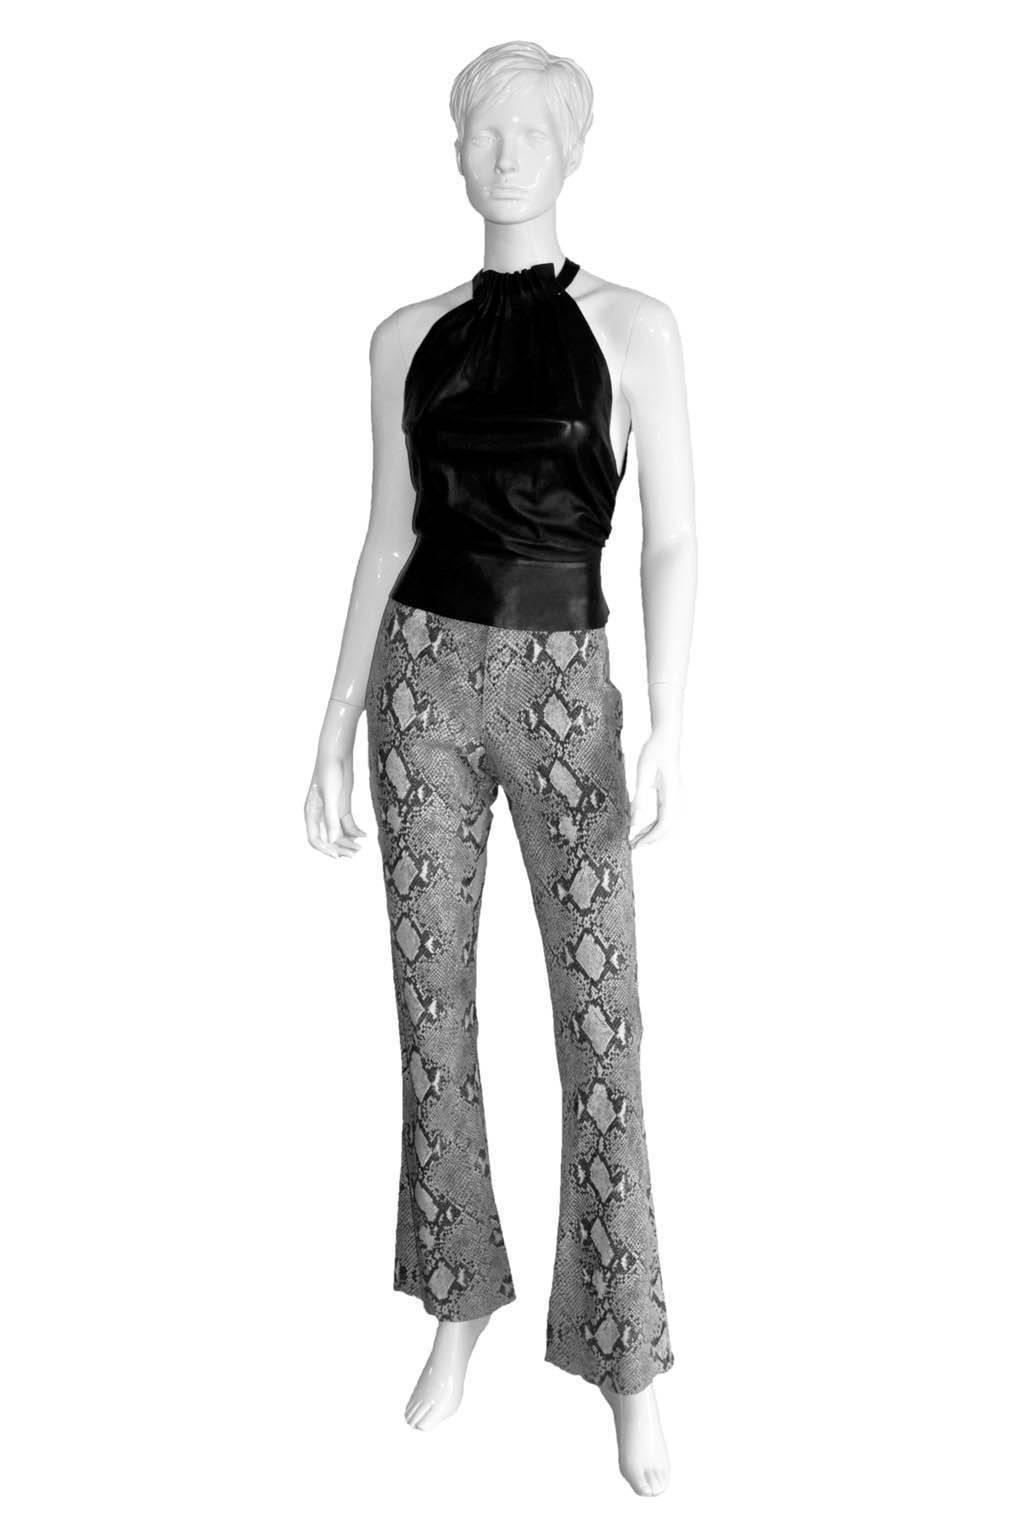 Rare & Iconic For Tom Ford For Gucci Spring Summer 2000 Python Print Suede Runway Pants!

Those amazing black & gray python suede runway pants from Tom Ford's gorgeous Spring/Summer 2000 Collection for Gucci! Almost impossible to find these days,